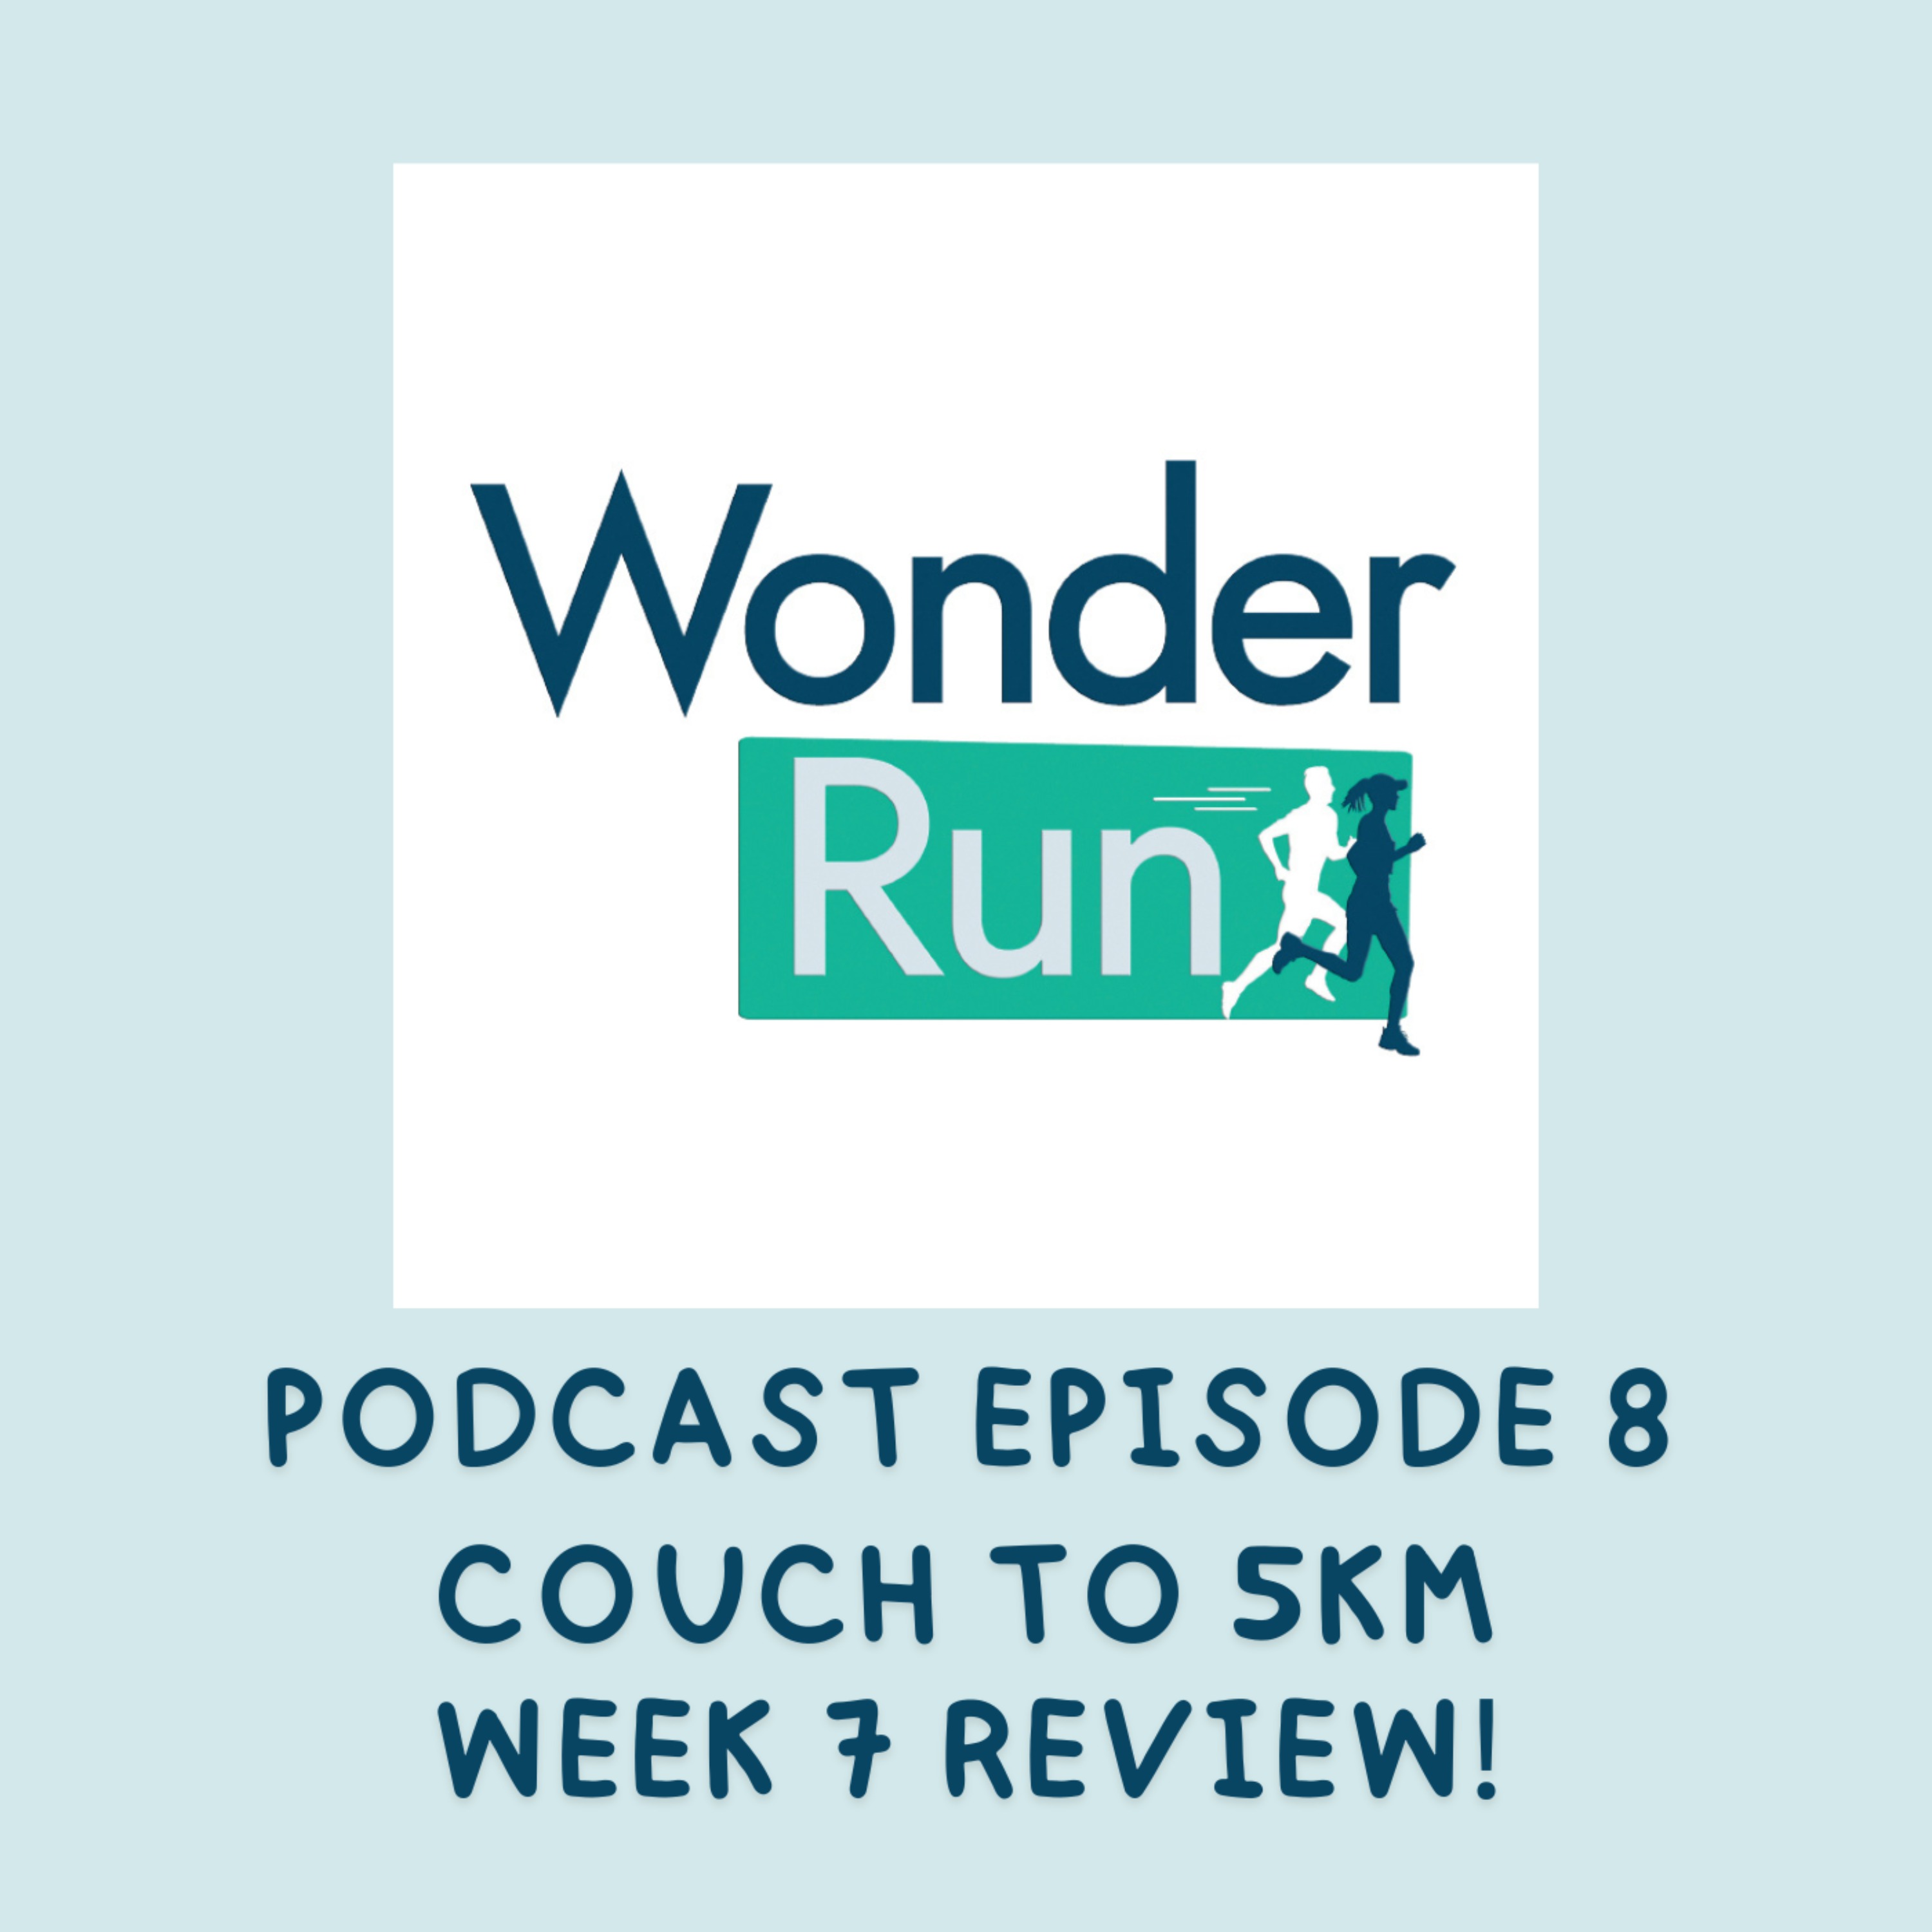 Couch to 5km - Week 7 Review!